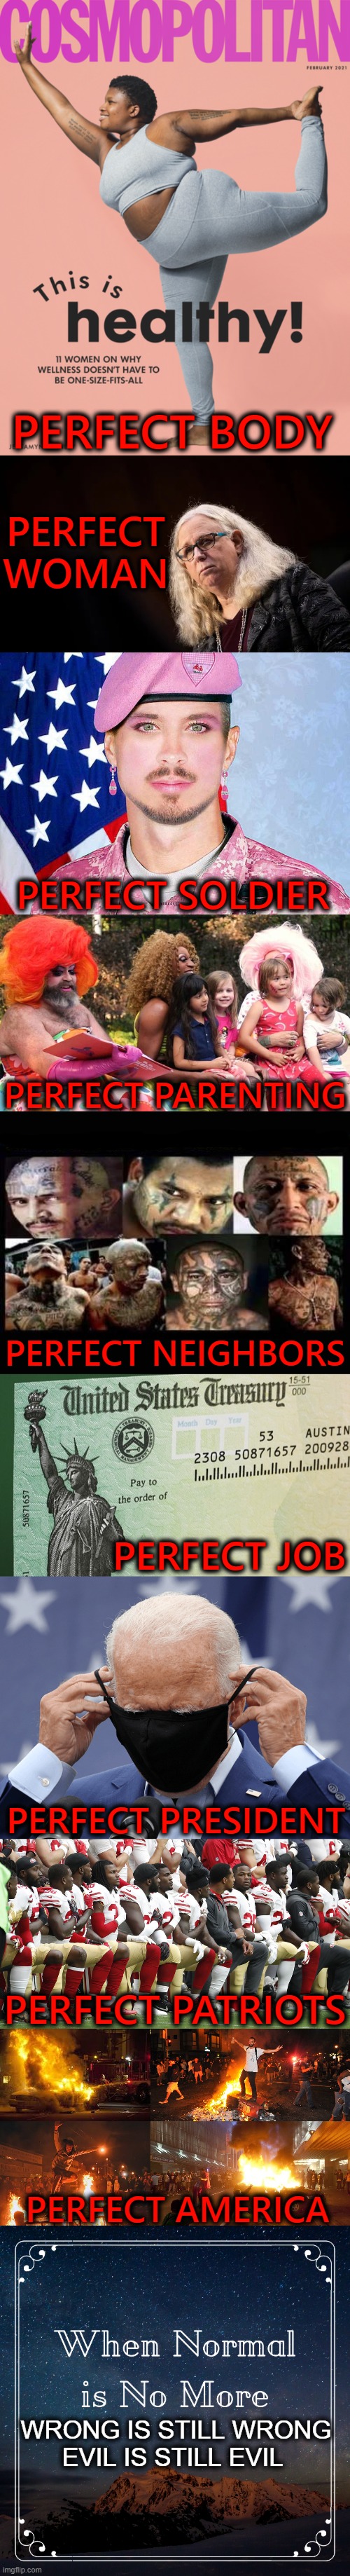 It's Well Past Time to Reject Radicalism | PERFECT BODY; PERFECT WOMAN; PERFECT SOLDIER; PERFECT PARENTING; PERFECT NEIGHBORS; PERFECT JOB; PERFECT PRESIDENT; PERFECT PATRIOTS; PERFECT AMERICA | image tagged in political meme,democratic socialism,radicalism,evil,upside-down | made w/ Imgflip meme maker